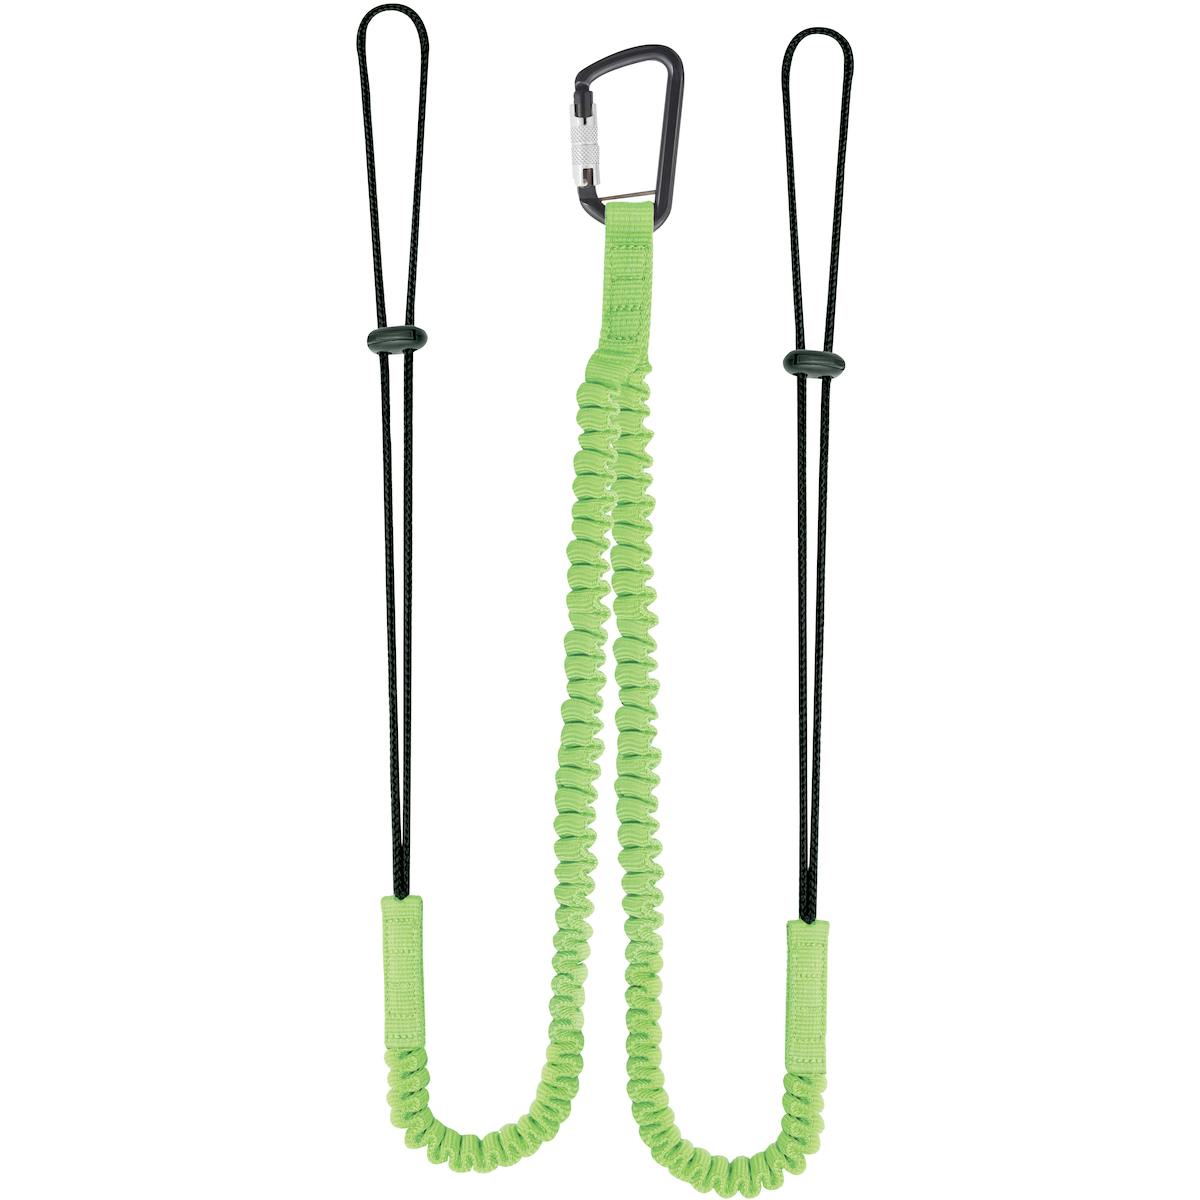 Double Leg Tool Tethering Lanyard - 10 lbs. maximum load limit - Retail Packaged, Green (533-100012) - OS_1